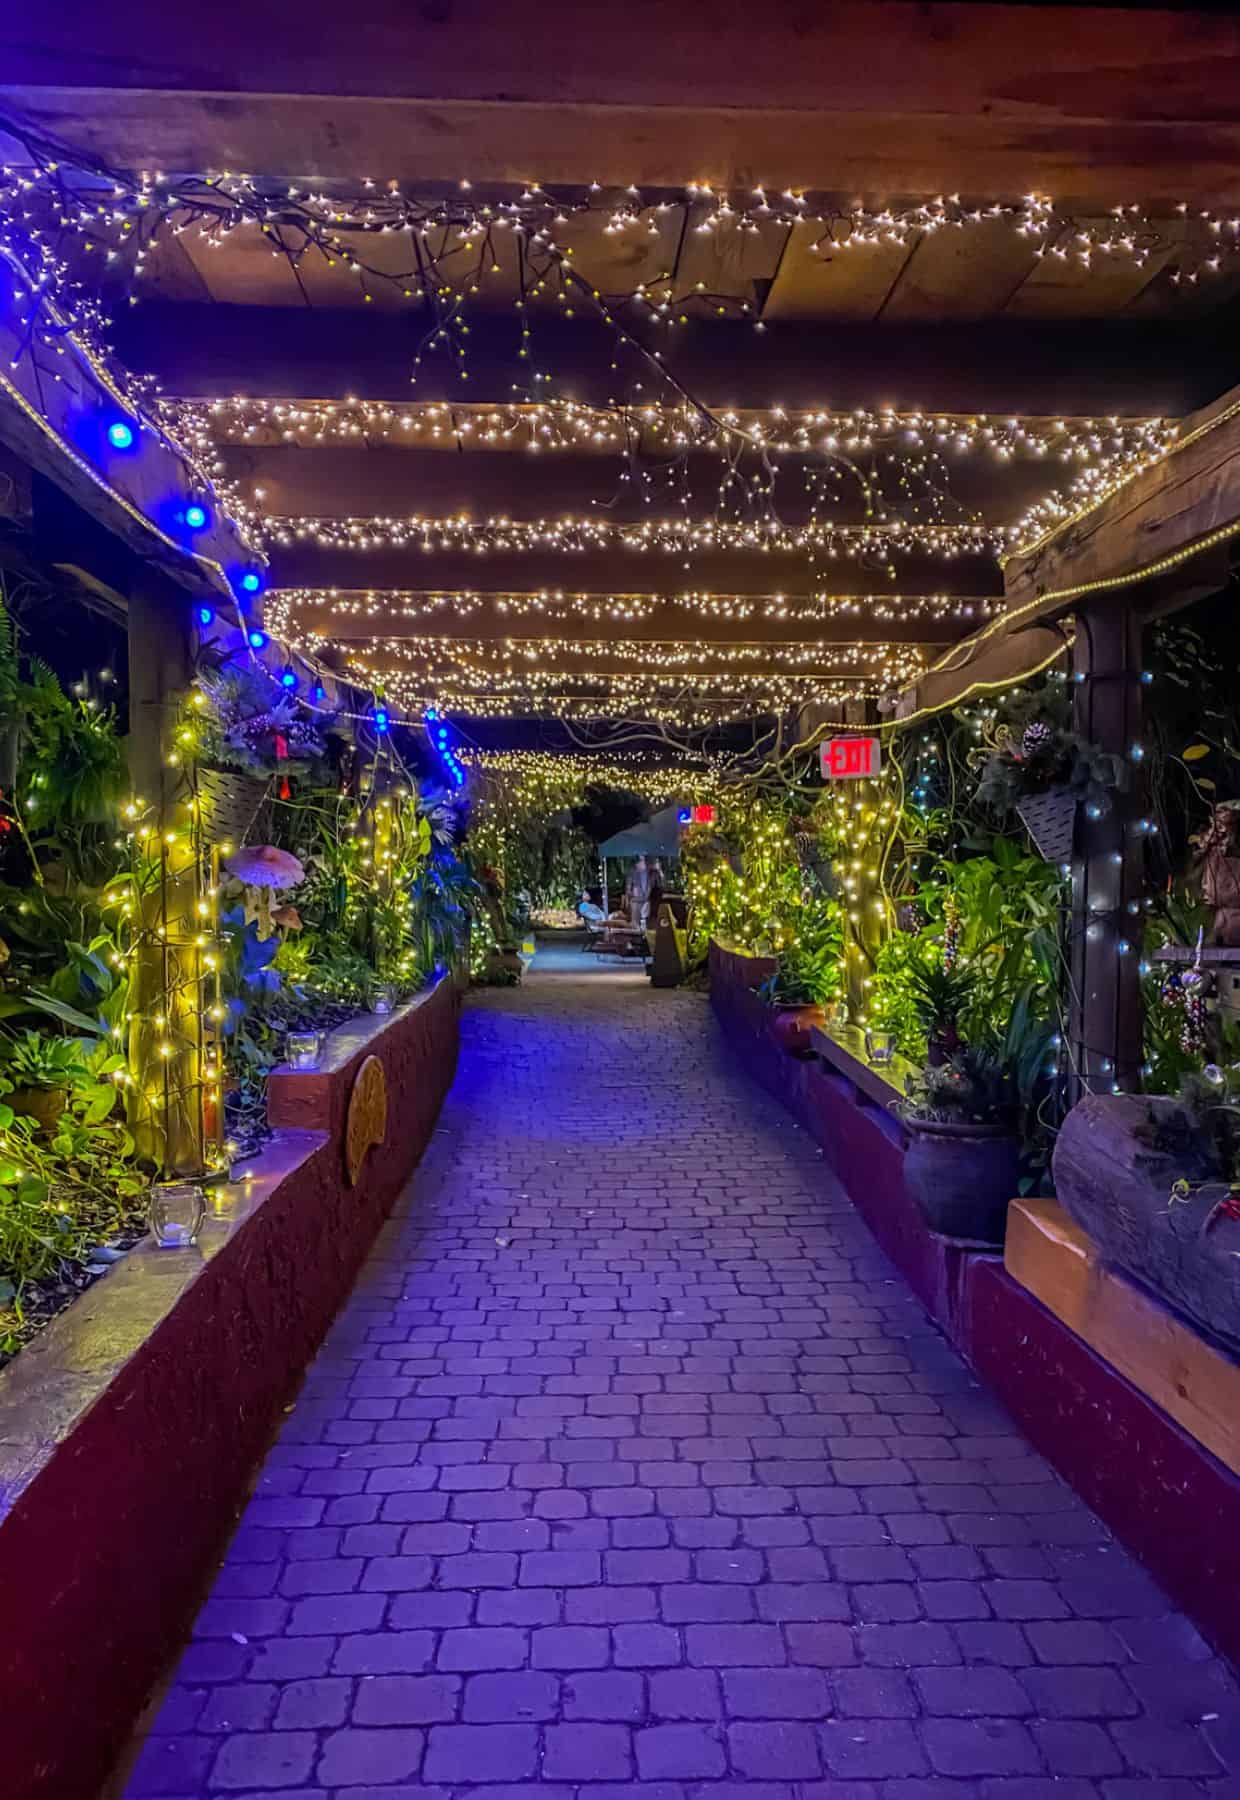 A walkway in New Smyrna Beach illuminated with blue and white lights, perfect for evening strolls.